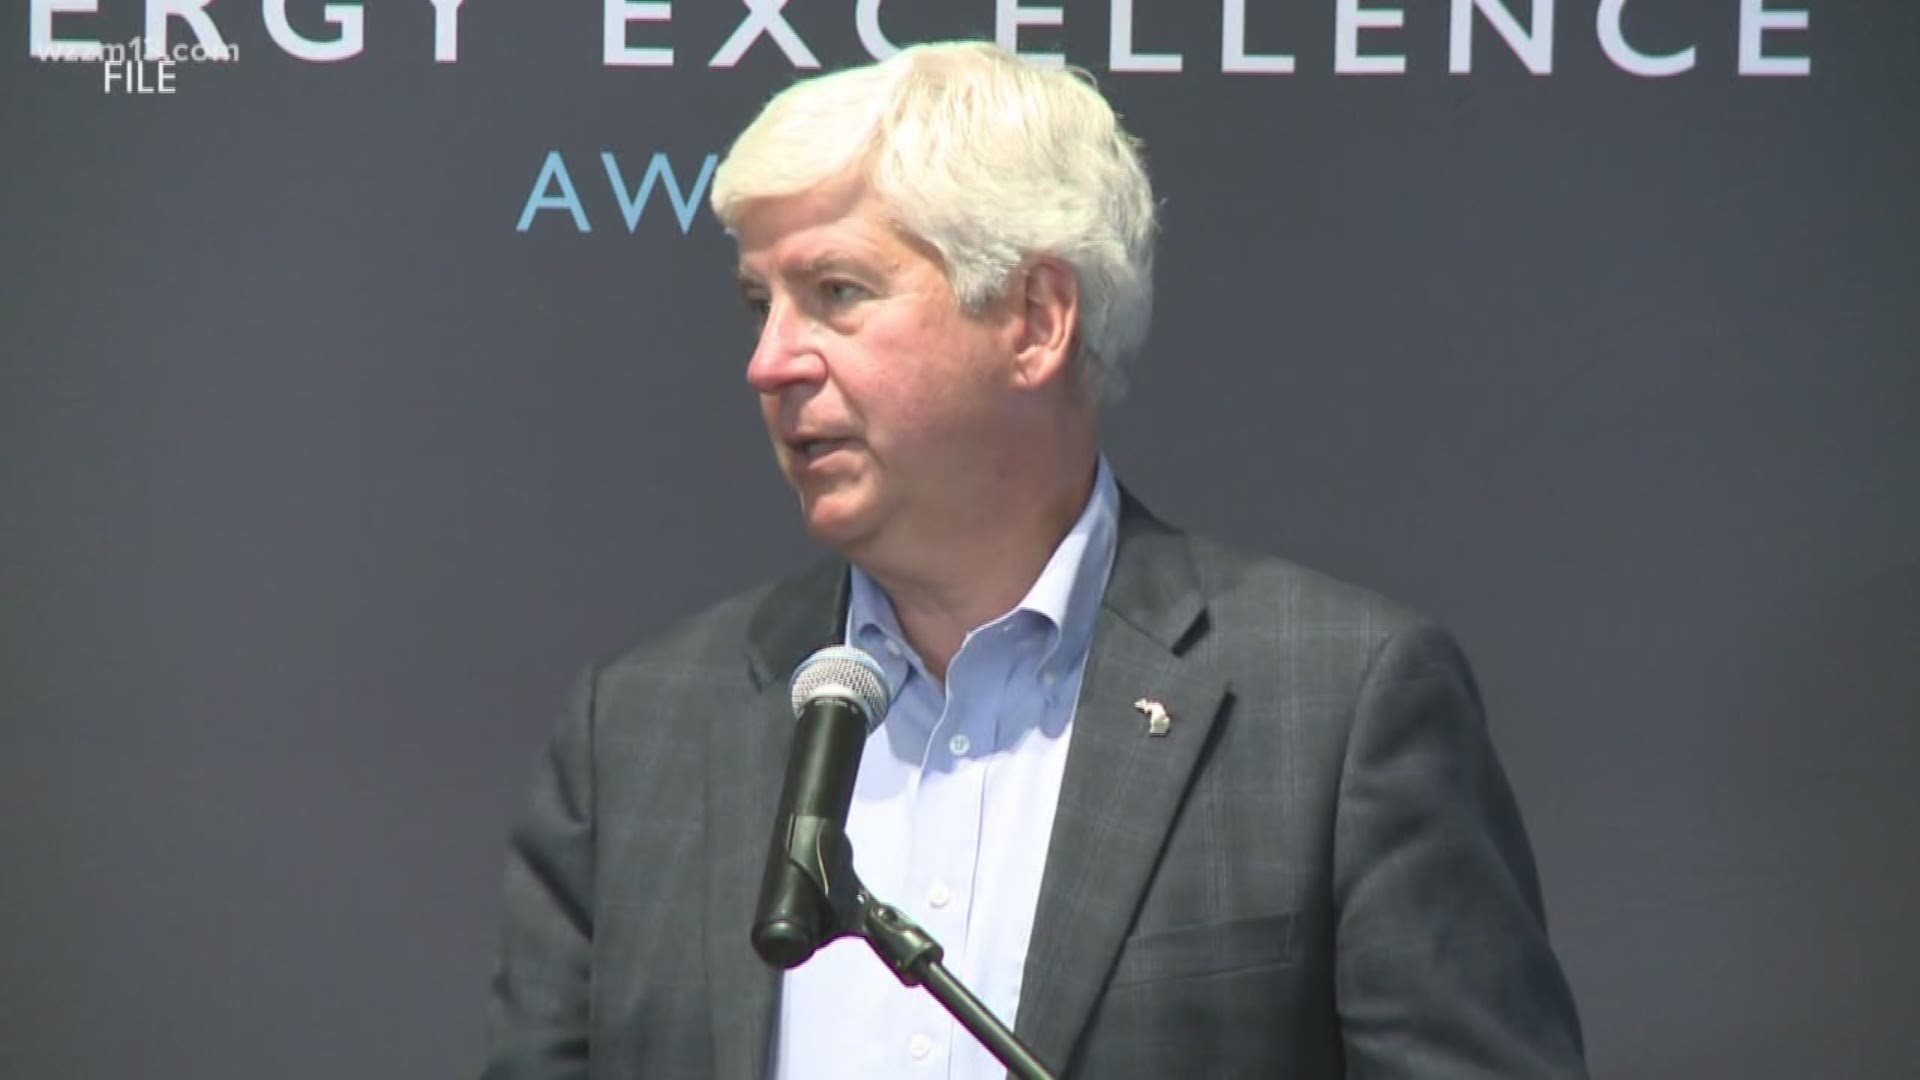 Two-term Michigan governor, Rick Snyder, is winding down his last few days in office. Here's a look back at the highs and lows of the Snyder administration and what's ahead for self-proclaimed tough nerd.